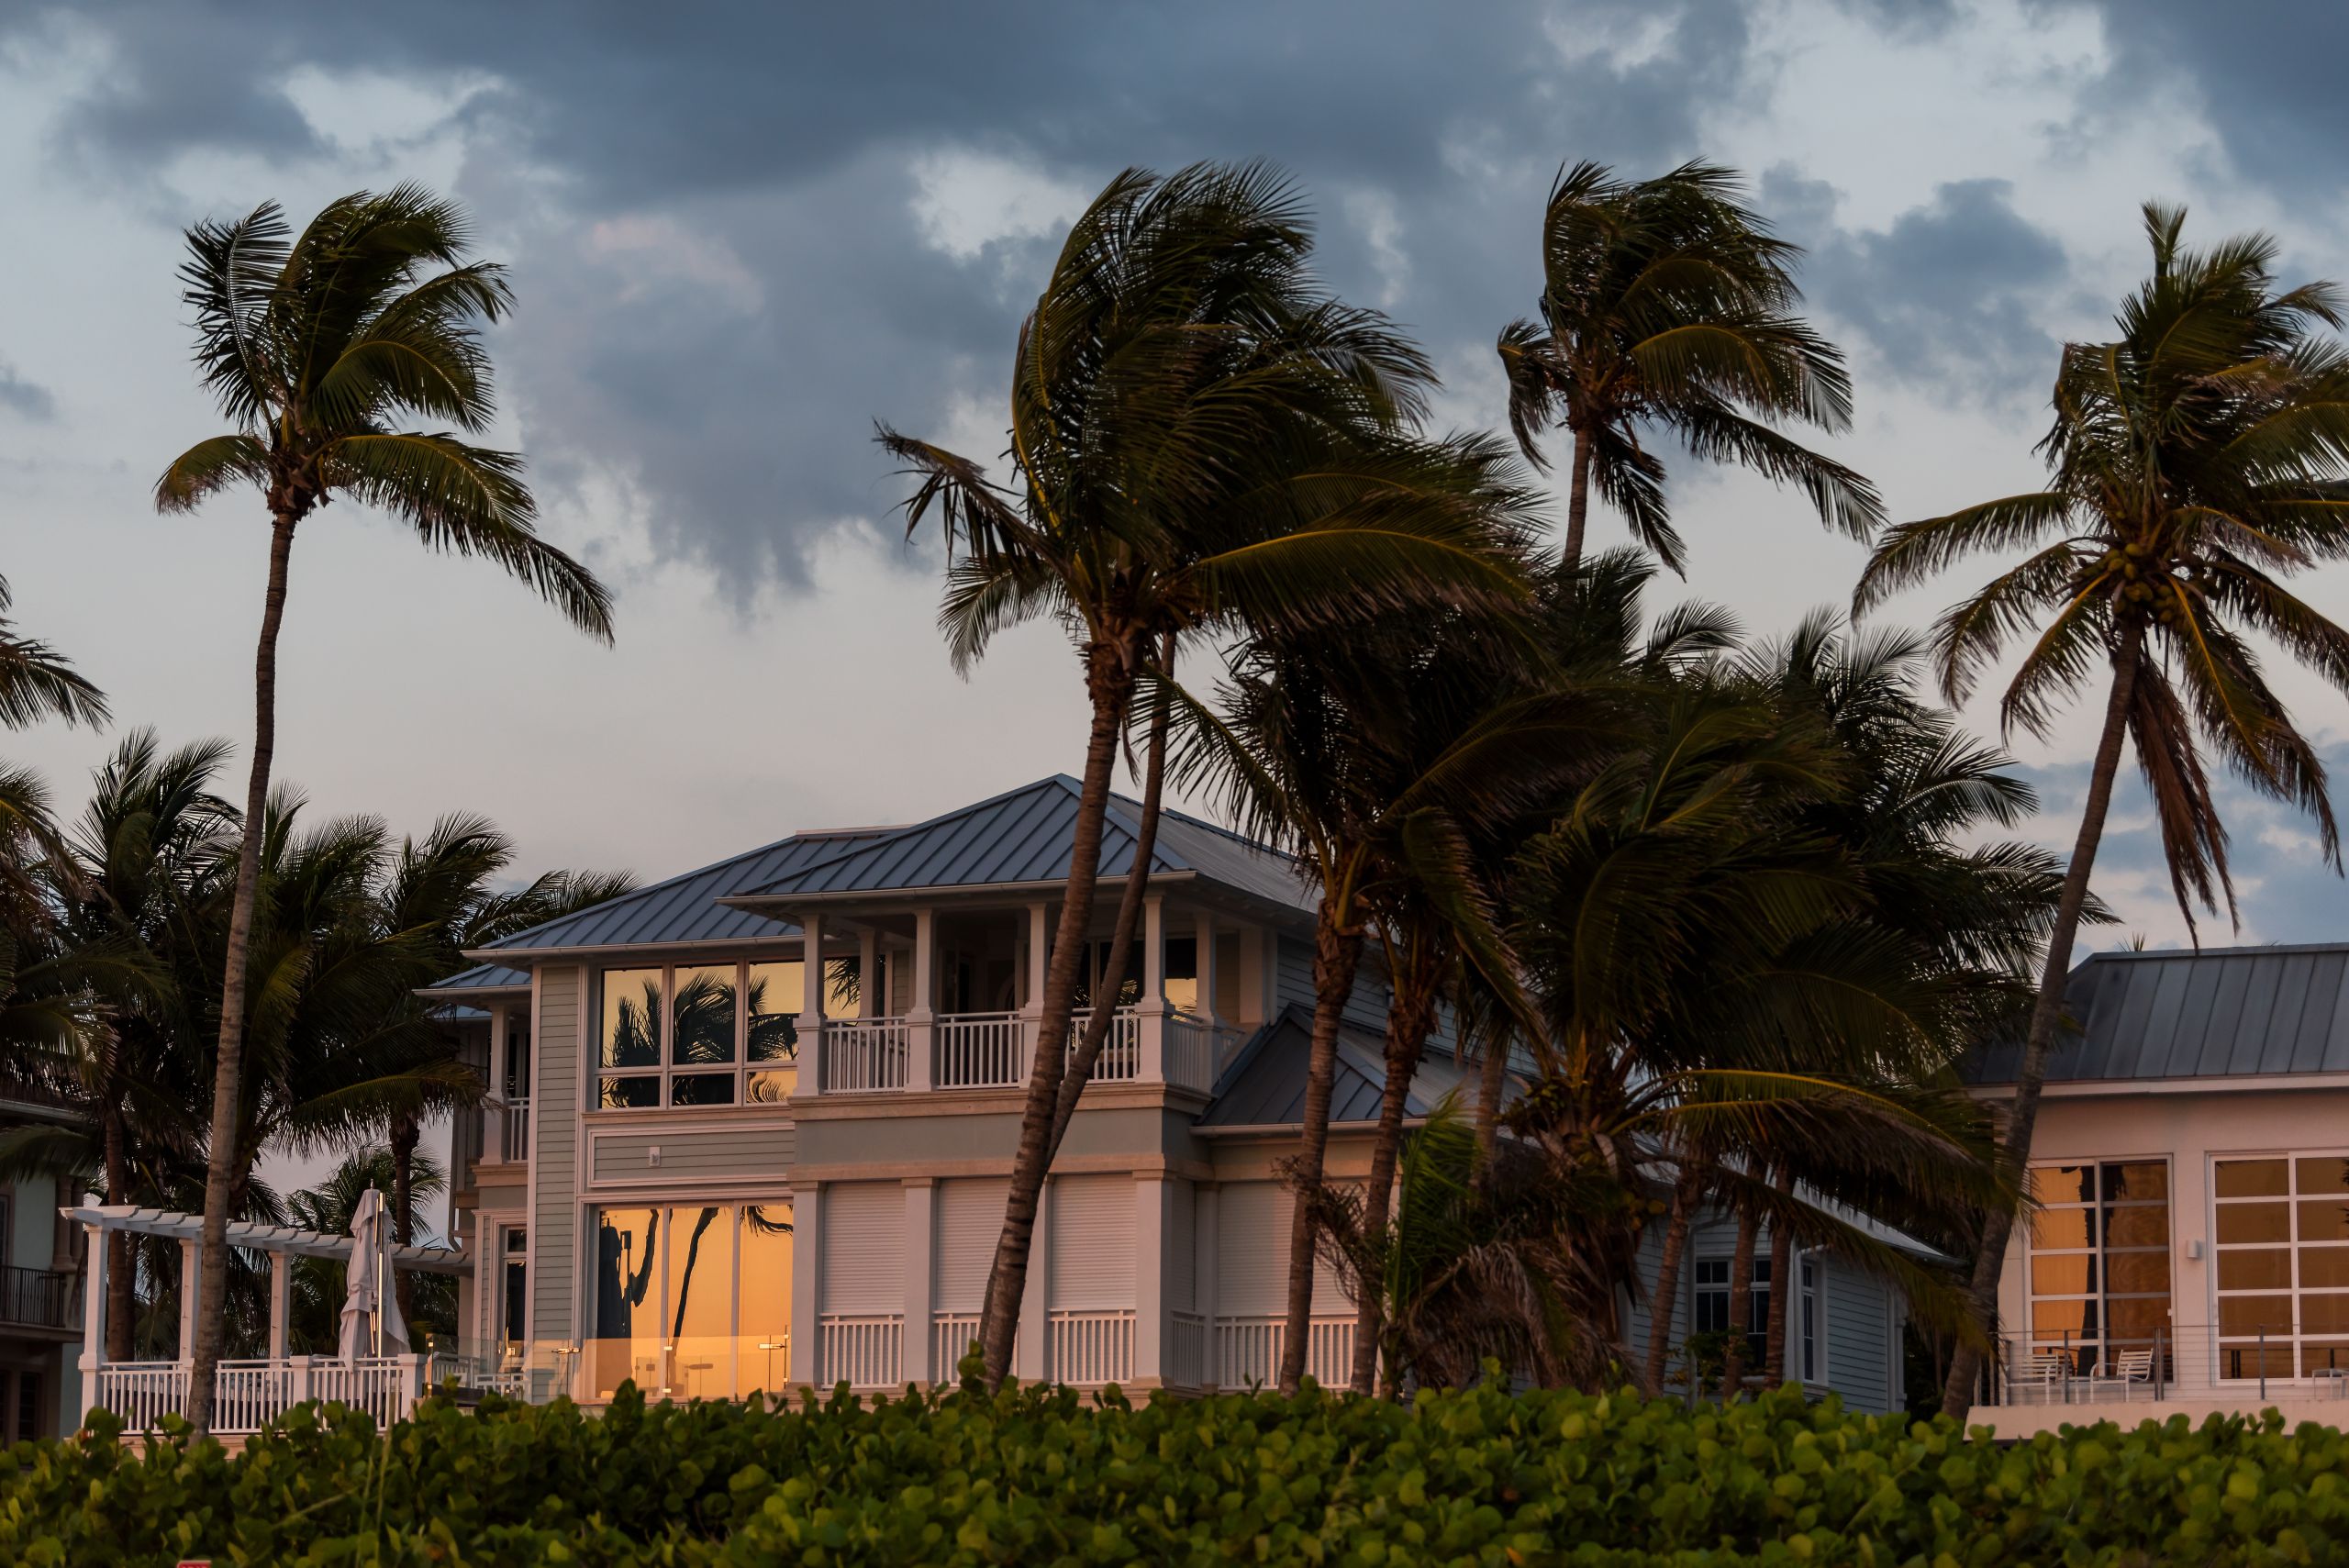 tropical home with palm trees swaying in storm - hurricane windows